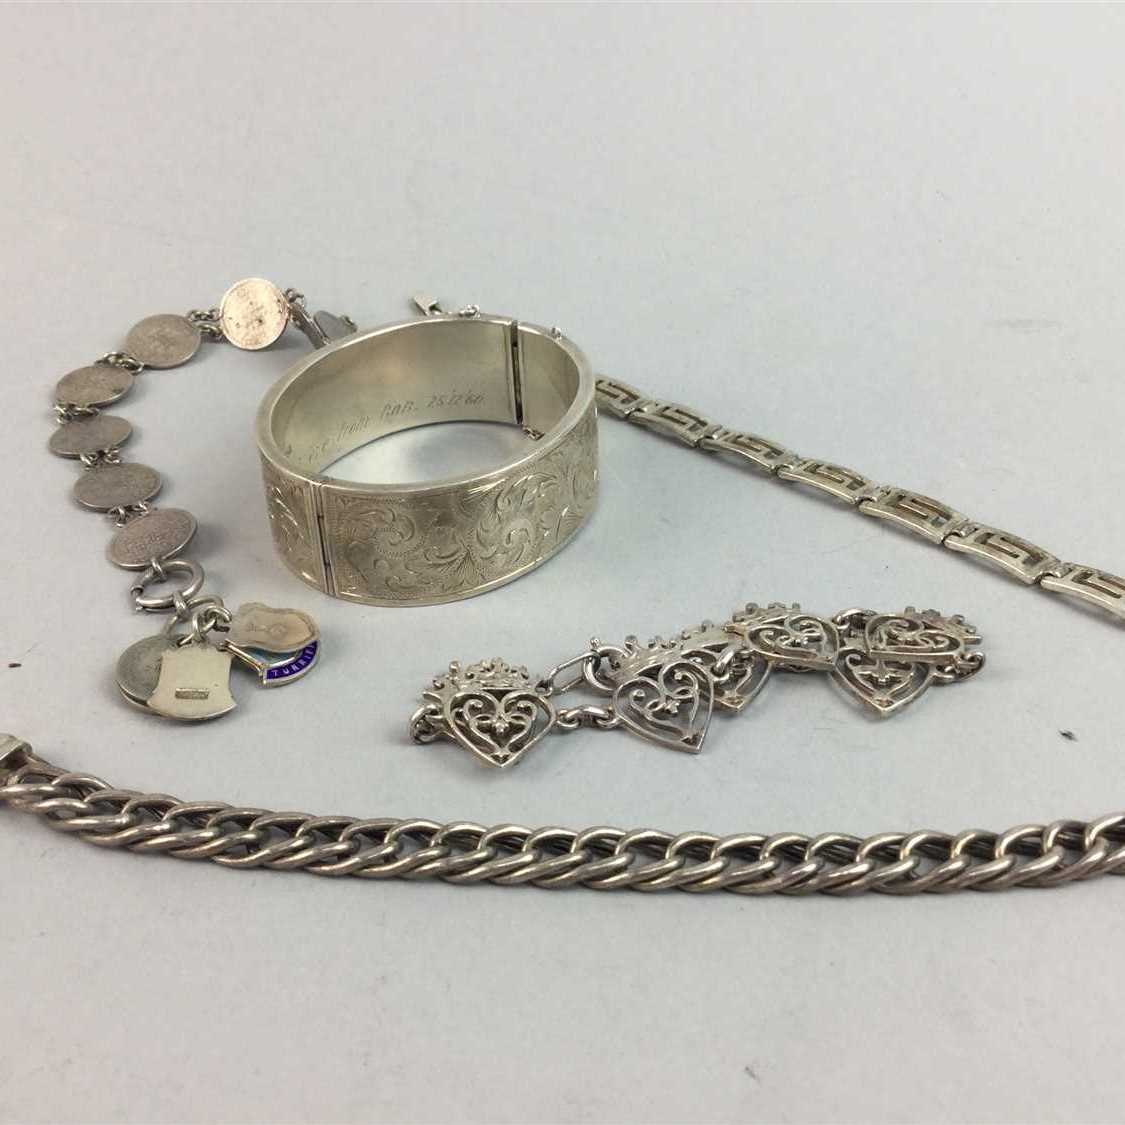 Lot 3 - A JOHN HART LUCKENBOOTH IONA SILVER BRACELET AND OTHER SILVER JEWELLERY